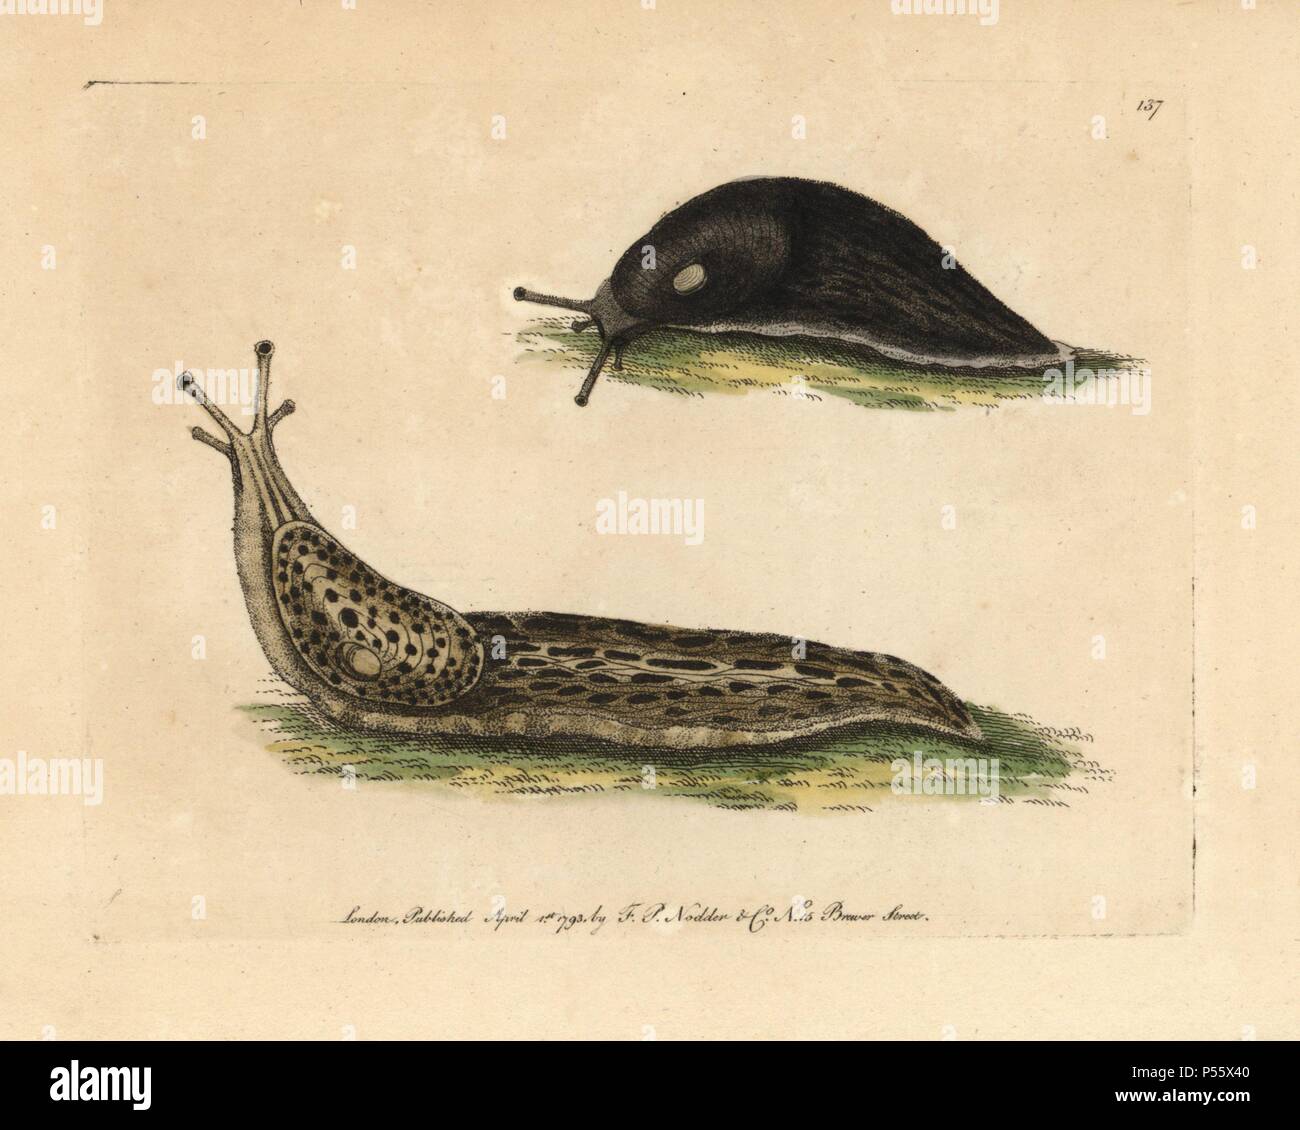 Black slug, great slug, Arion ater, Limax maximus. Illustration signed S (George Shaw).. Handcolored copperplate engraving from George Shaw and Frederick Nodder's 'The Naturalist's Miscellany' 1793.. Frederick Polydore Nodder (17511801?) was a gifted natural history artist and engraver. Nodder honed his draftsmanship working on Captain Cook and Joseph Banks' Florilegium and engraving Sydney Parkinson's sketches of Australian plants. He was made 'botanic painter to her majesty' Queen Charlotte in 1785. Nodder also drew the botanical studies in Thomas Martyn's Flora Rustica (1792) and 38 Plates Stock Photo